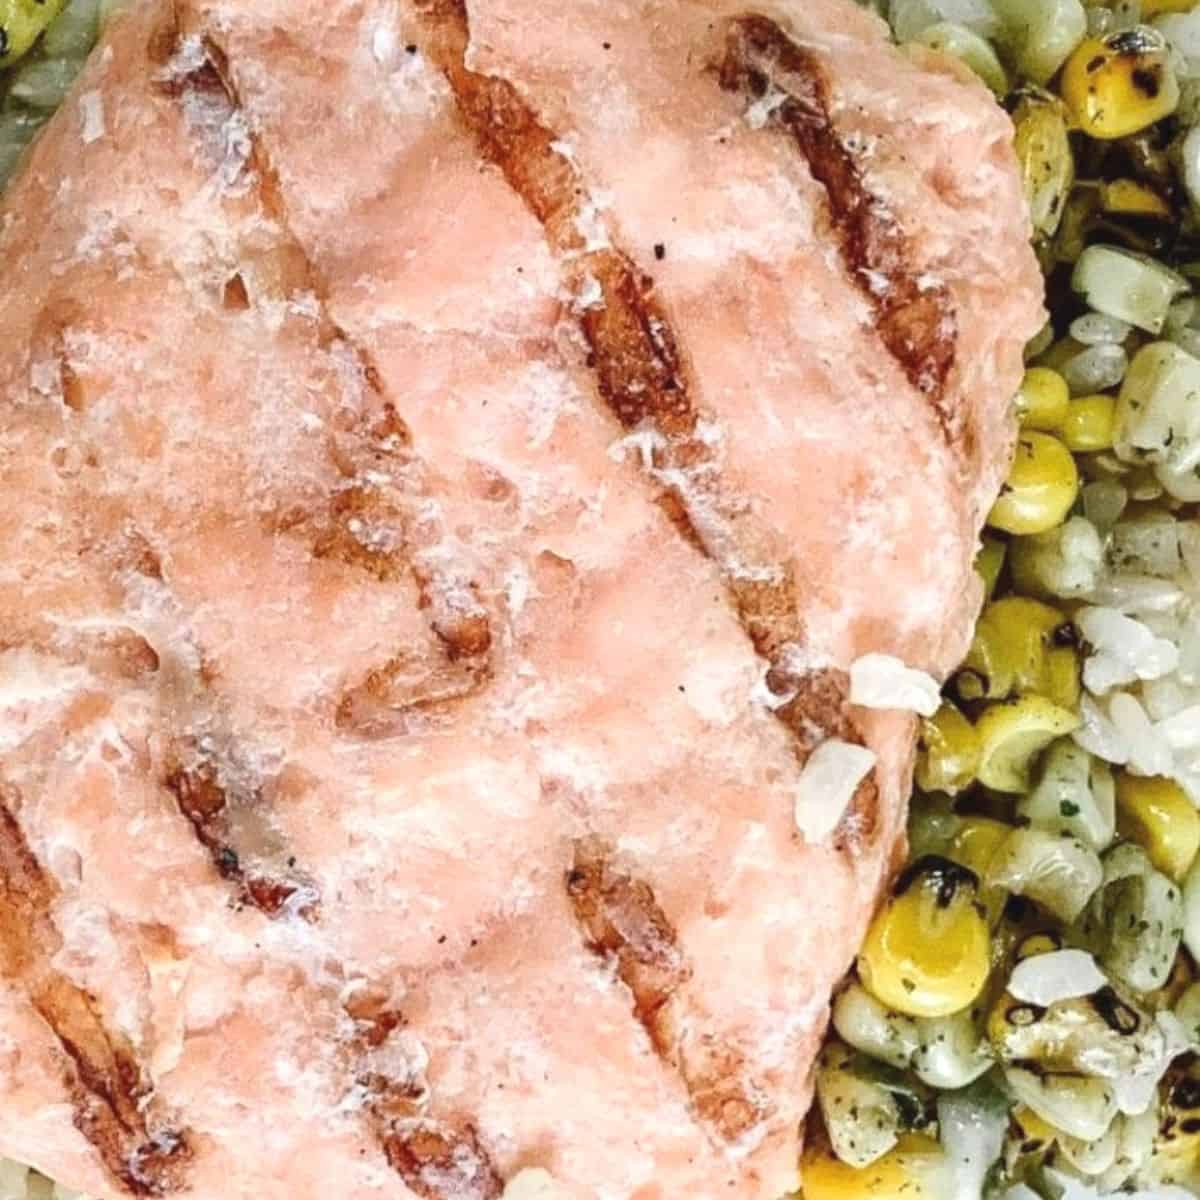 The perfect easy lunch recipe, lemon salmon with brown rice